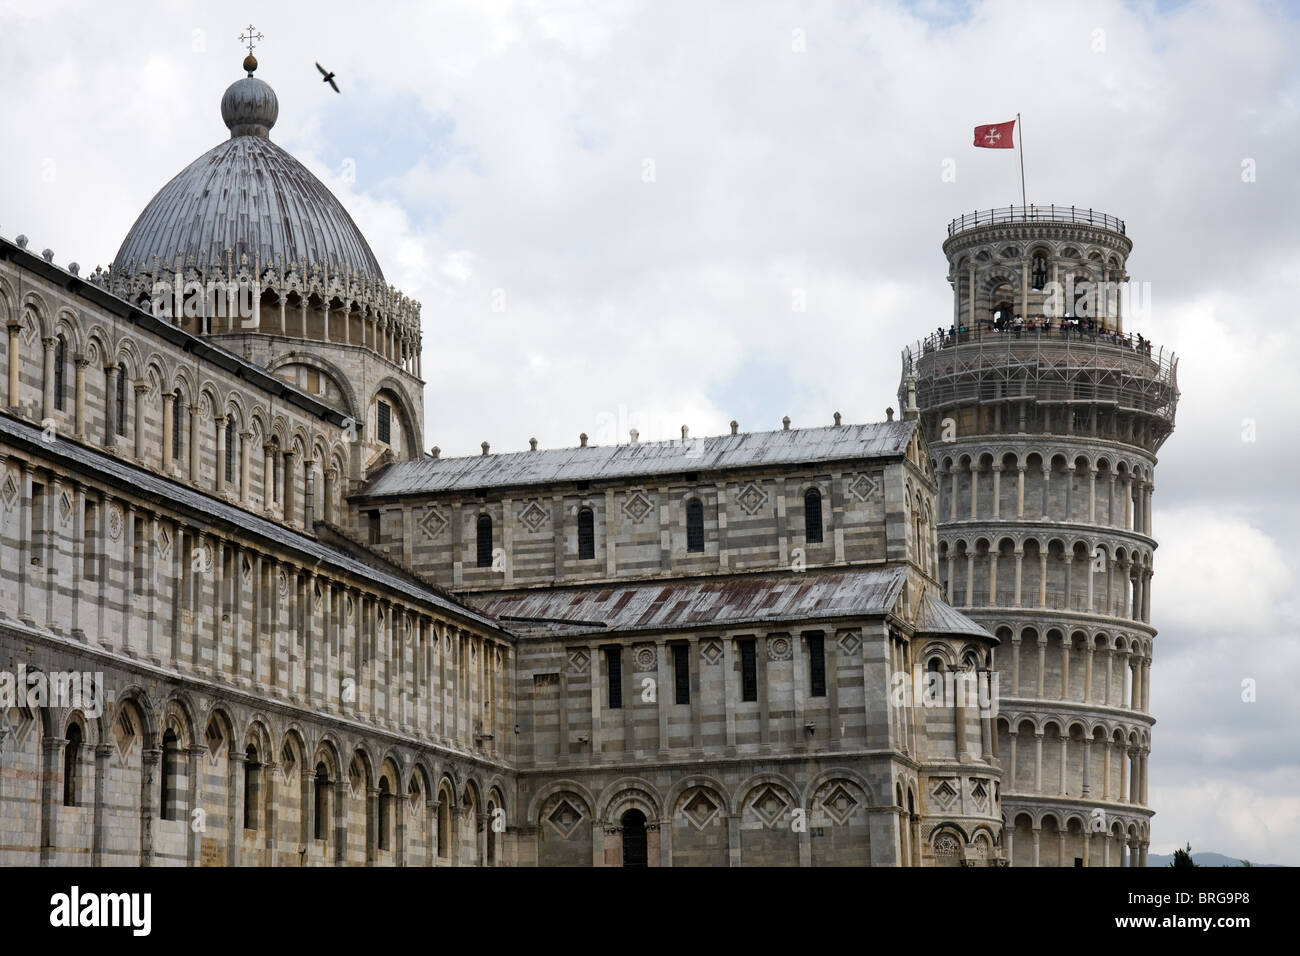 The Catherdral and Leaning Tower of Pisa Stock Photo